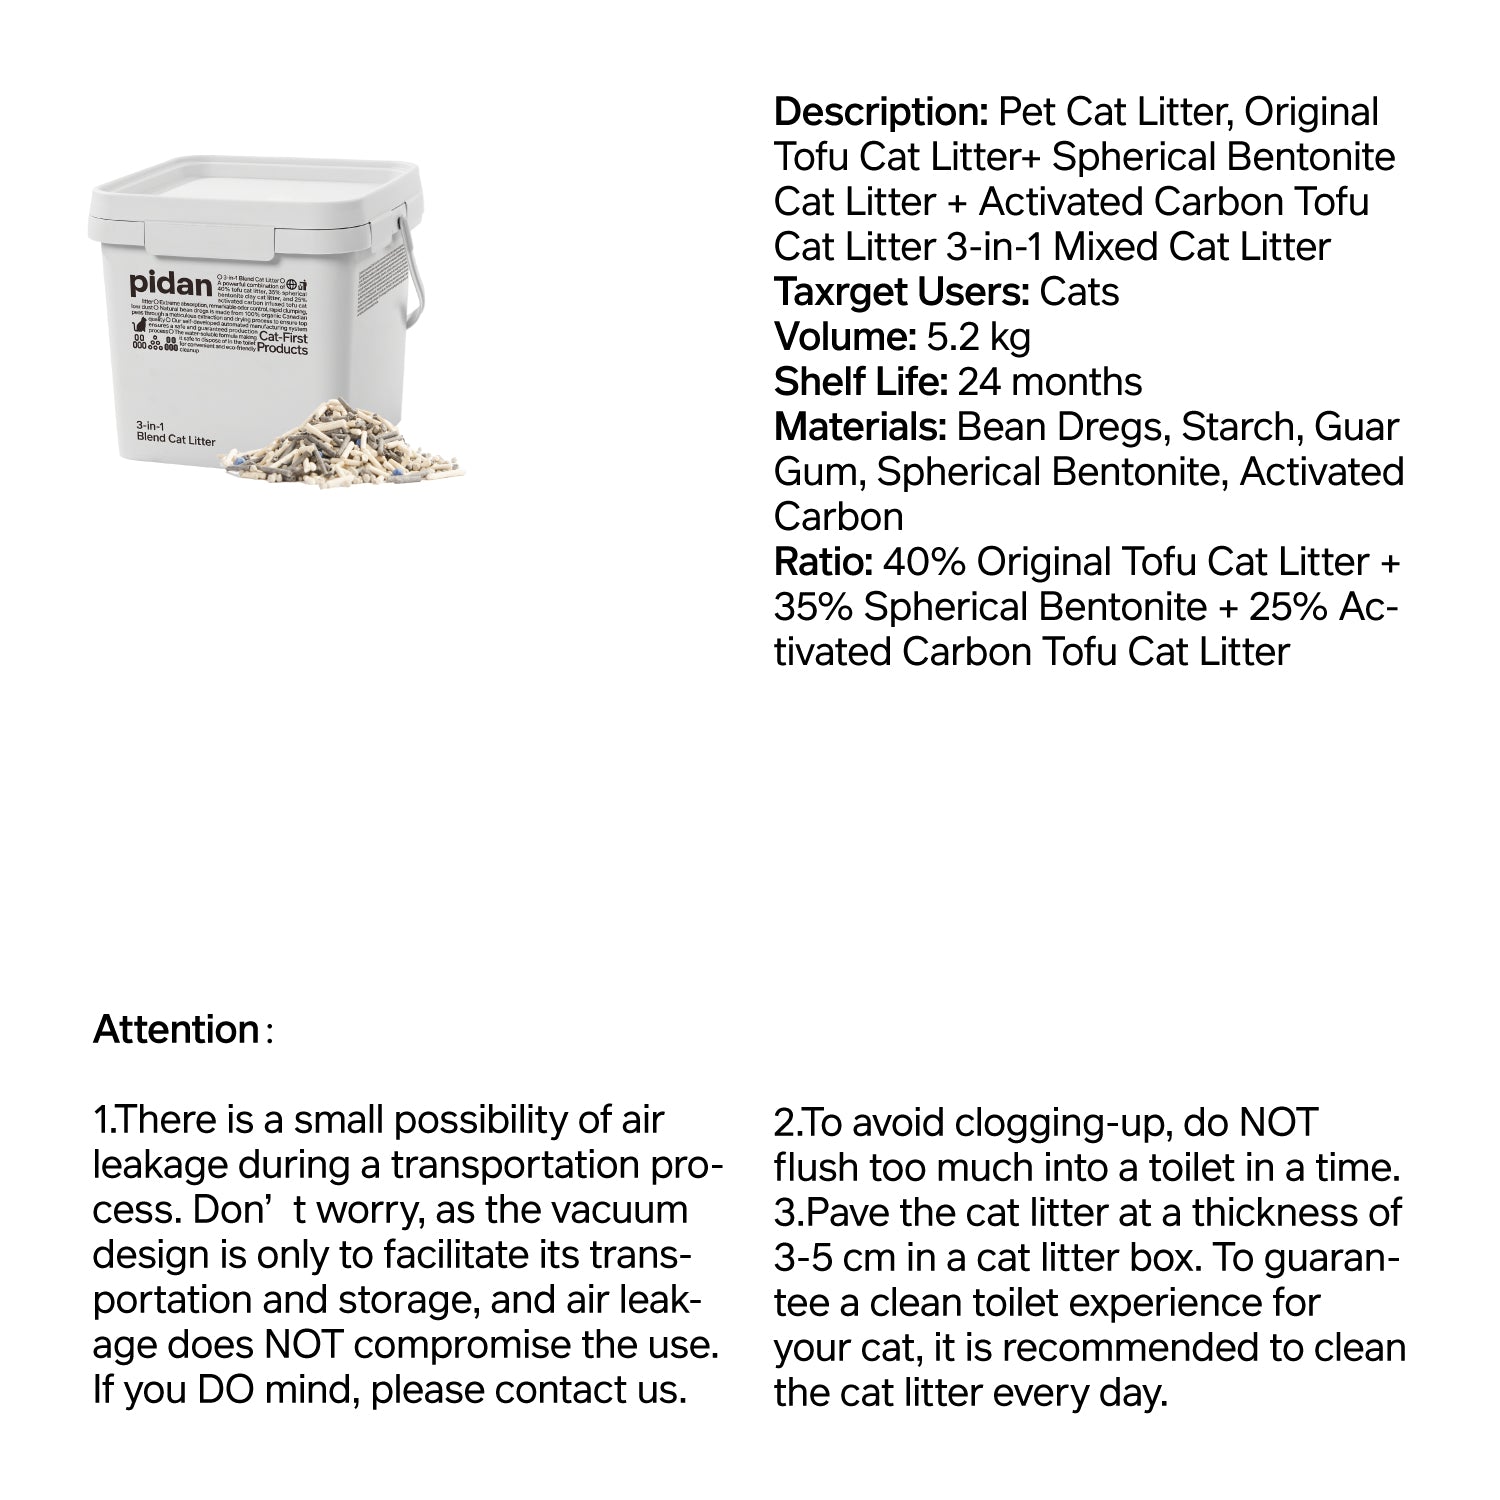 3-in-1 Blend Cat Litter (Tofu, Spherical Bentonite Clay,  Activated Carbon Infused Tofu)